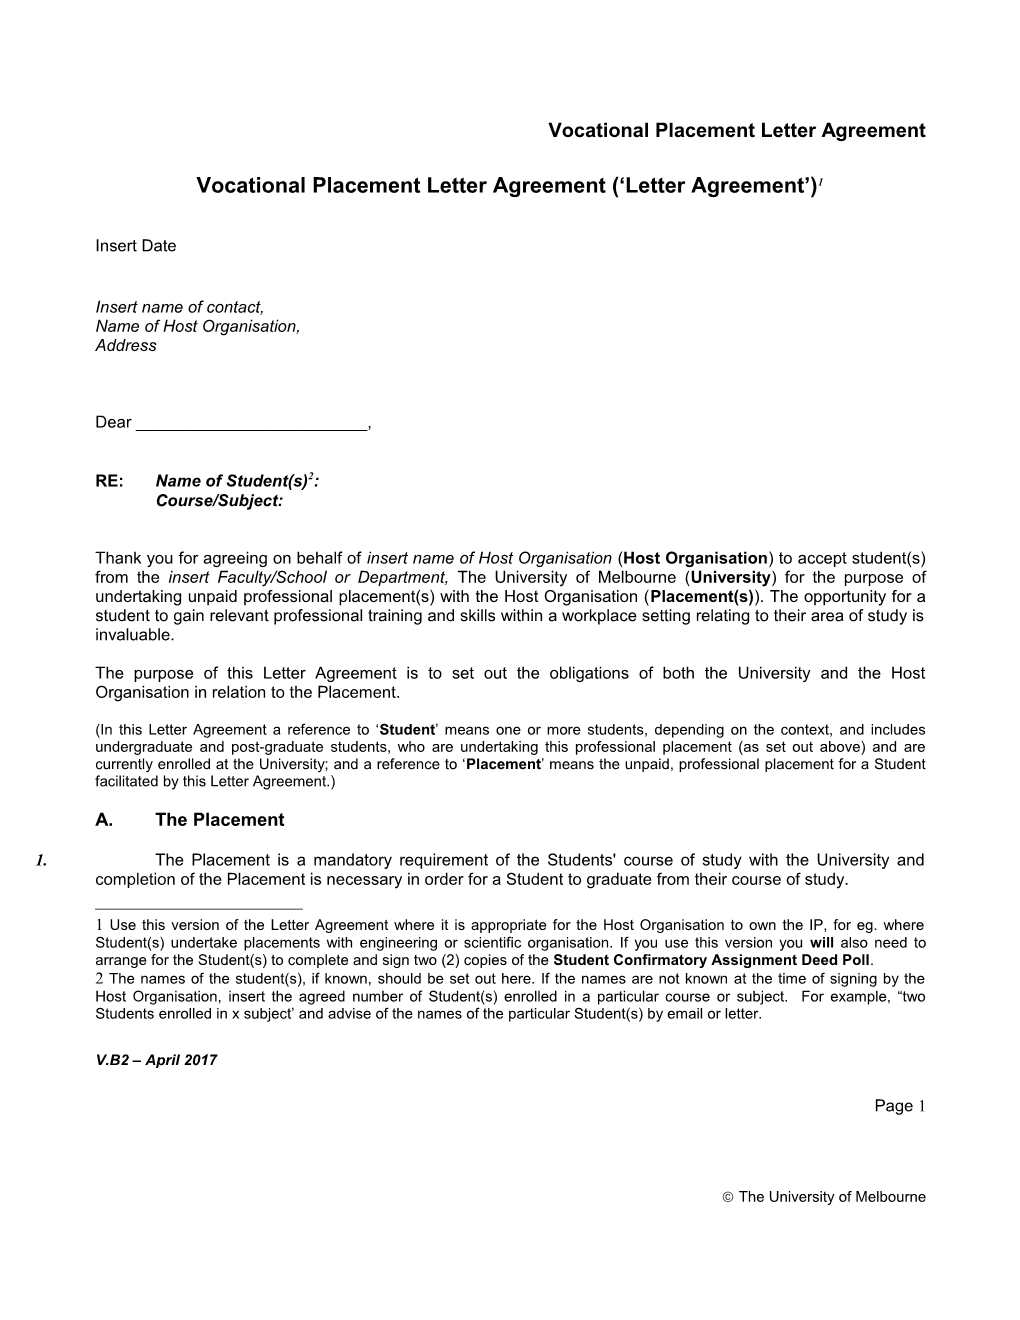 Vocational Placement Letter Agreement ( Letter Agreement ) 1